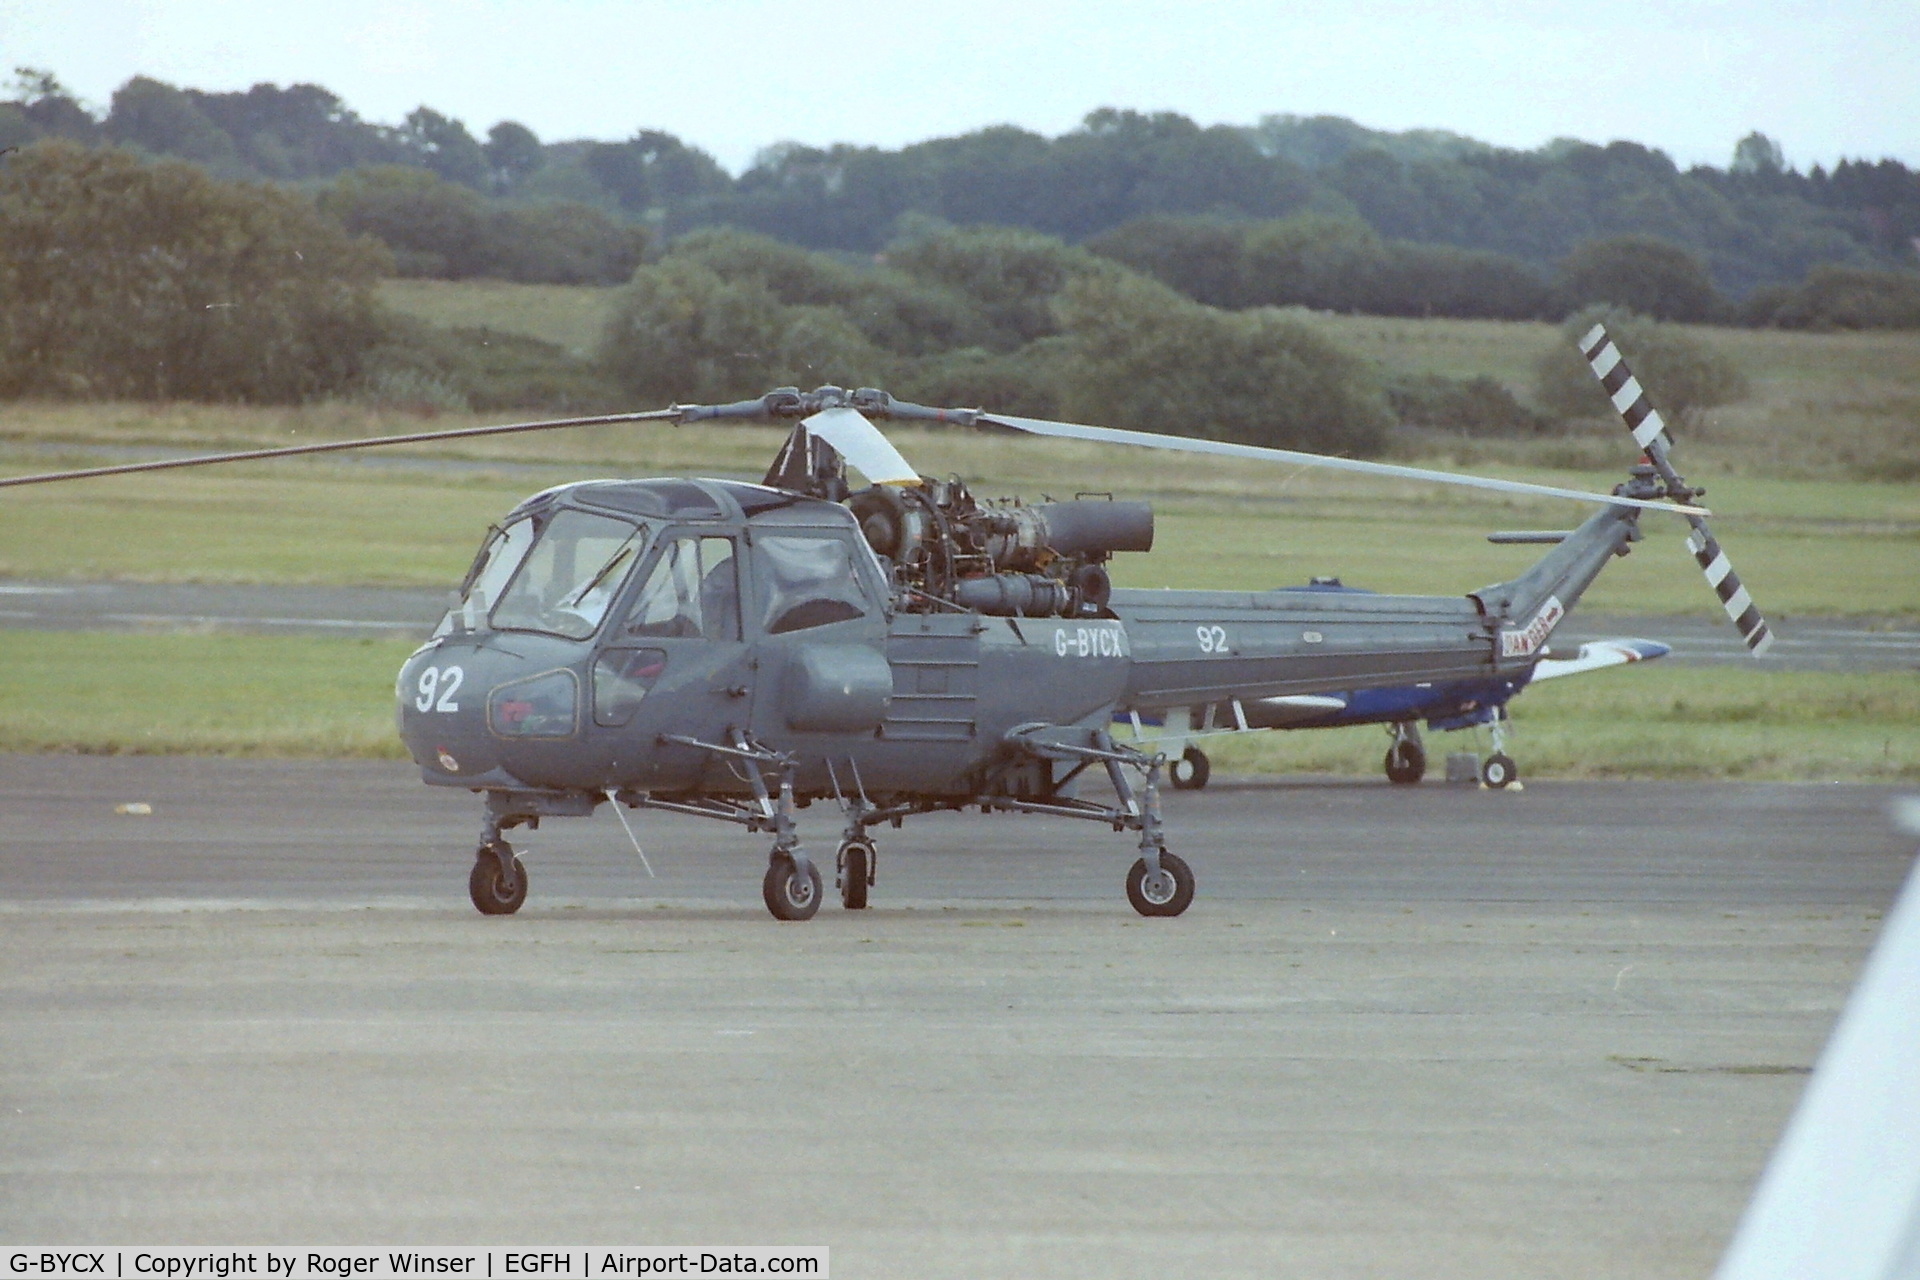 G-BYCX, 1973 Westland WASP MK1B C/N F9754, Visiting ex-South African Air Force naval helicopter (coded 92) visiting Swansea Airport circa 2003. Operated by 22 Squadron SAAF in the maritime role. 